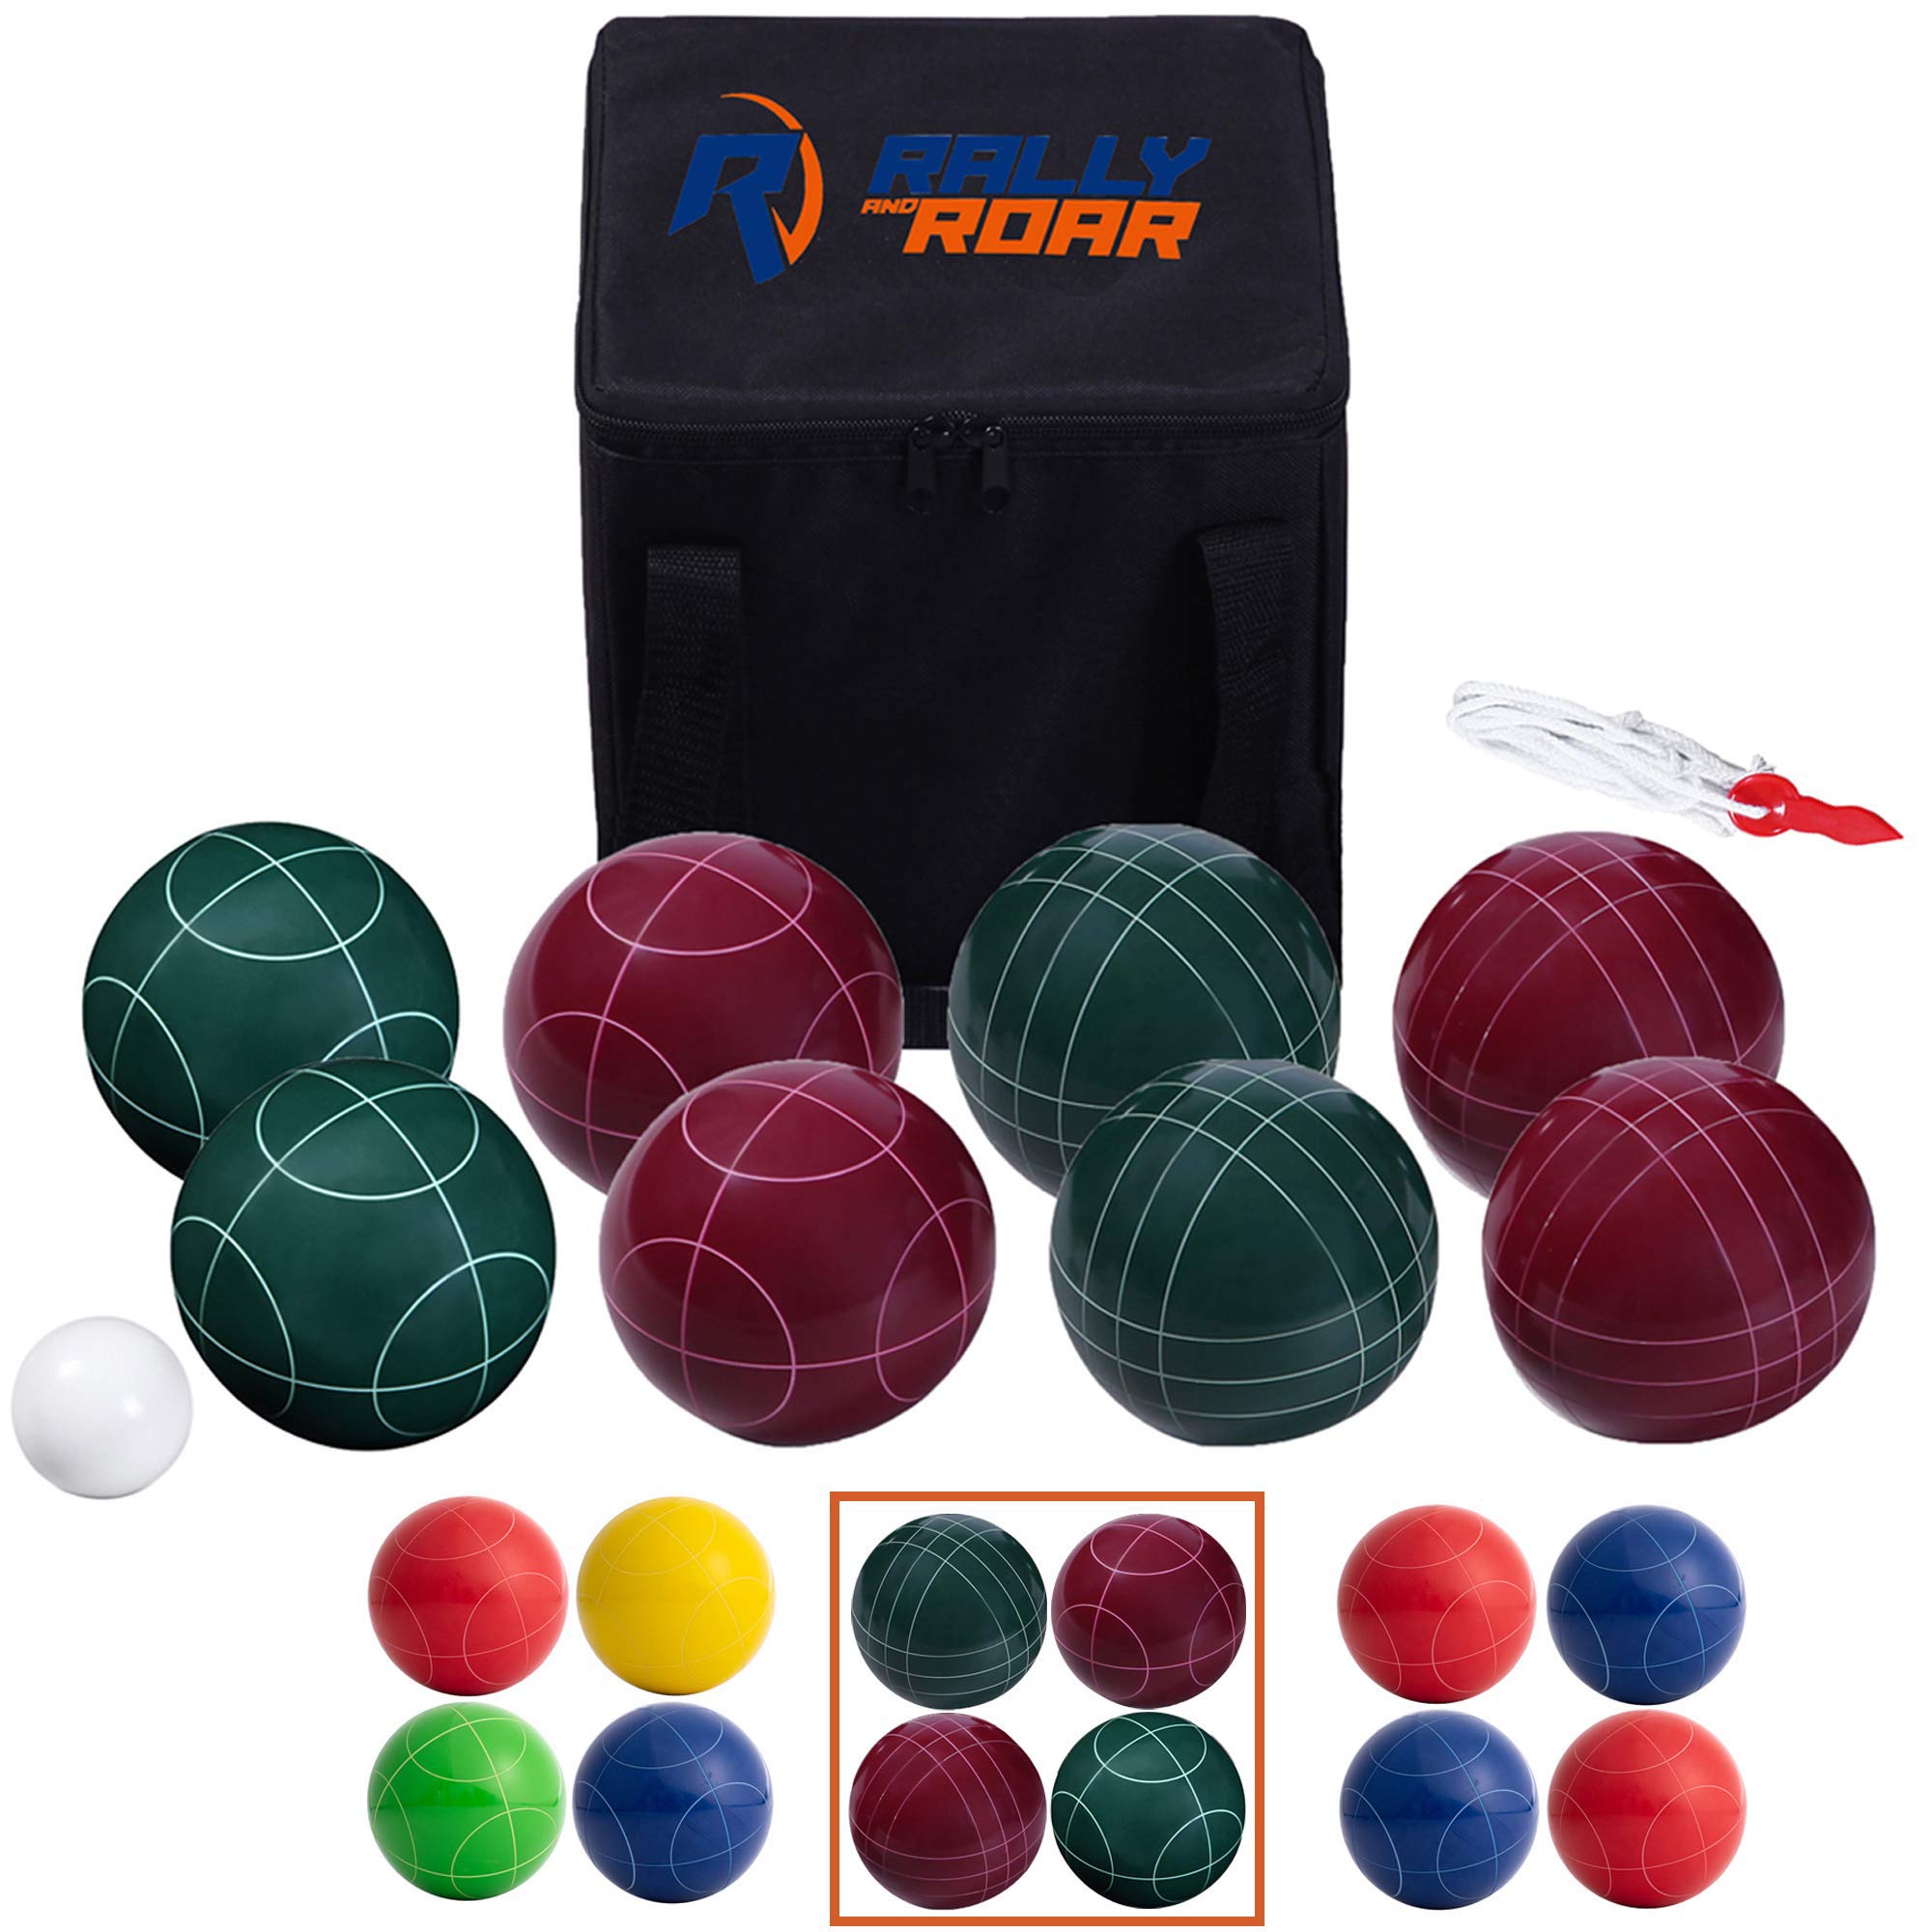 90mm Rally & Roar Backyard Bocce Ball Game Set (Red/Green) $13.10 + Free Shipping w/ Prime or on $35+